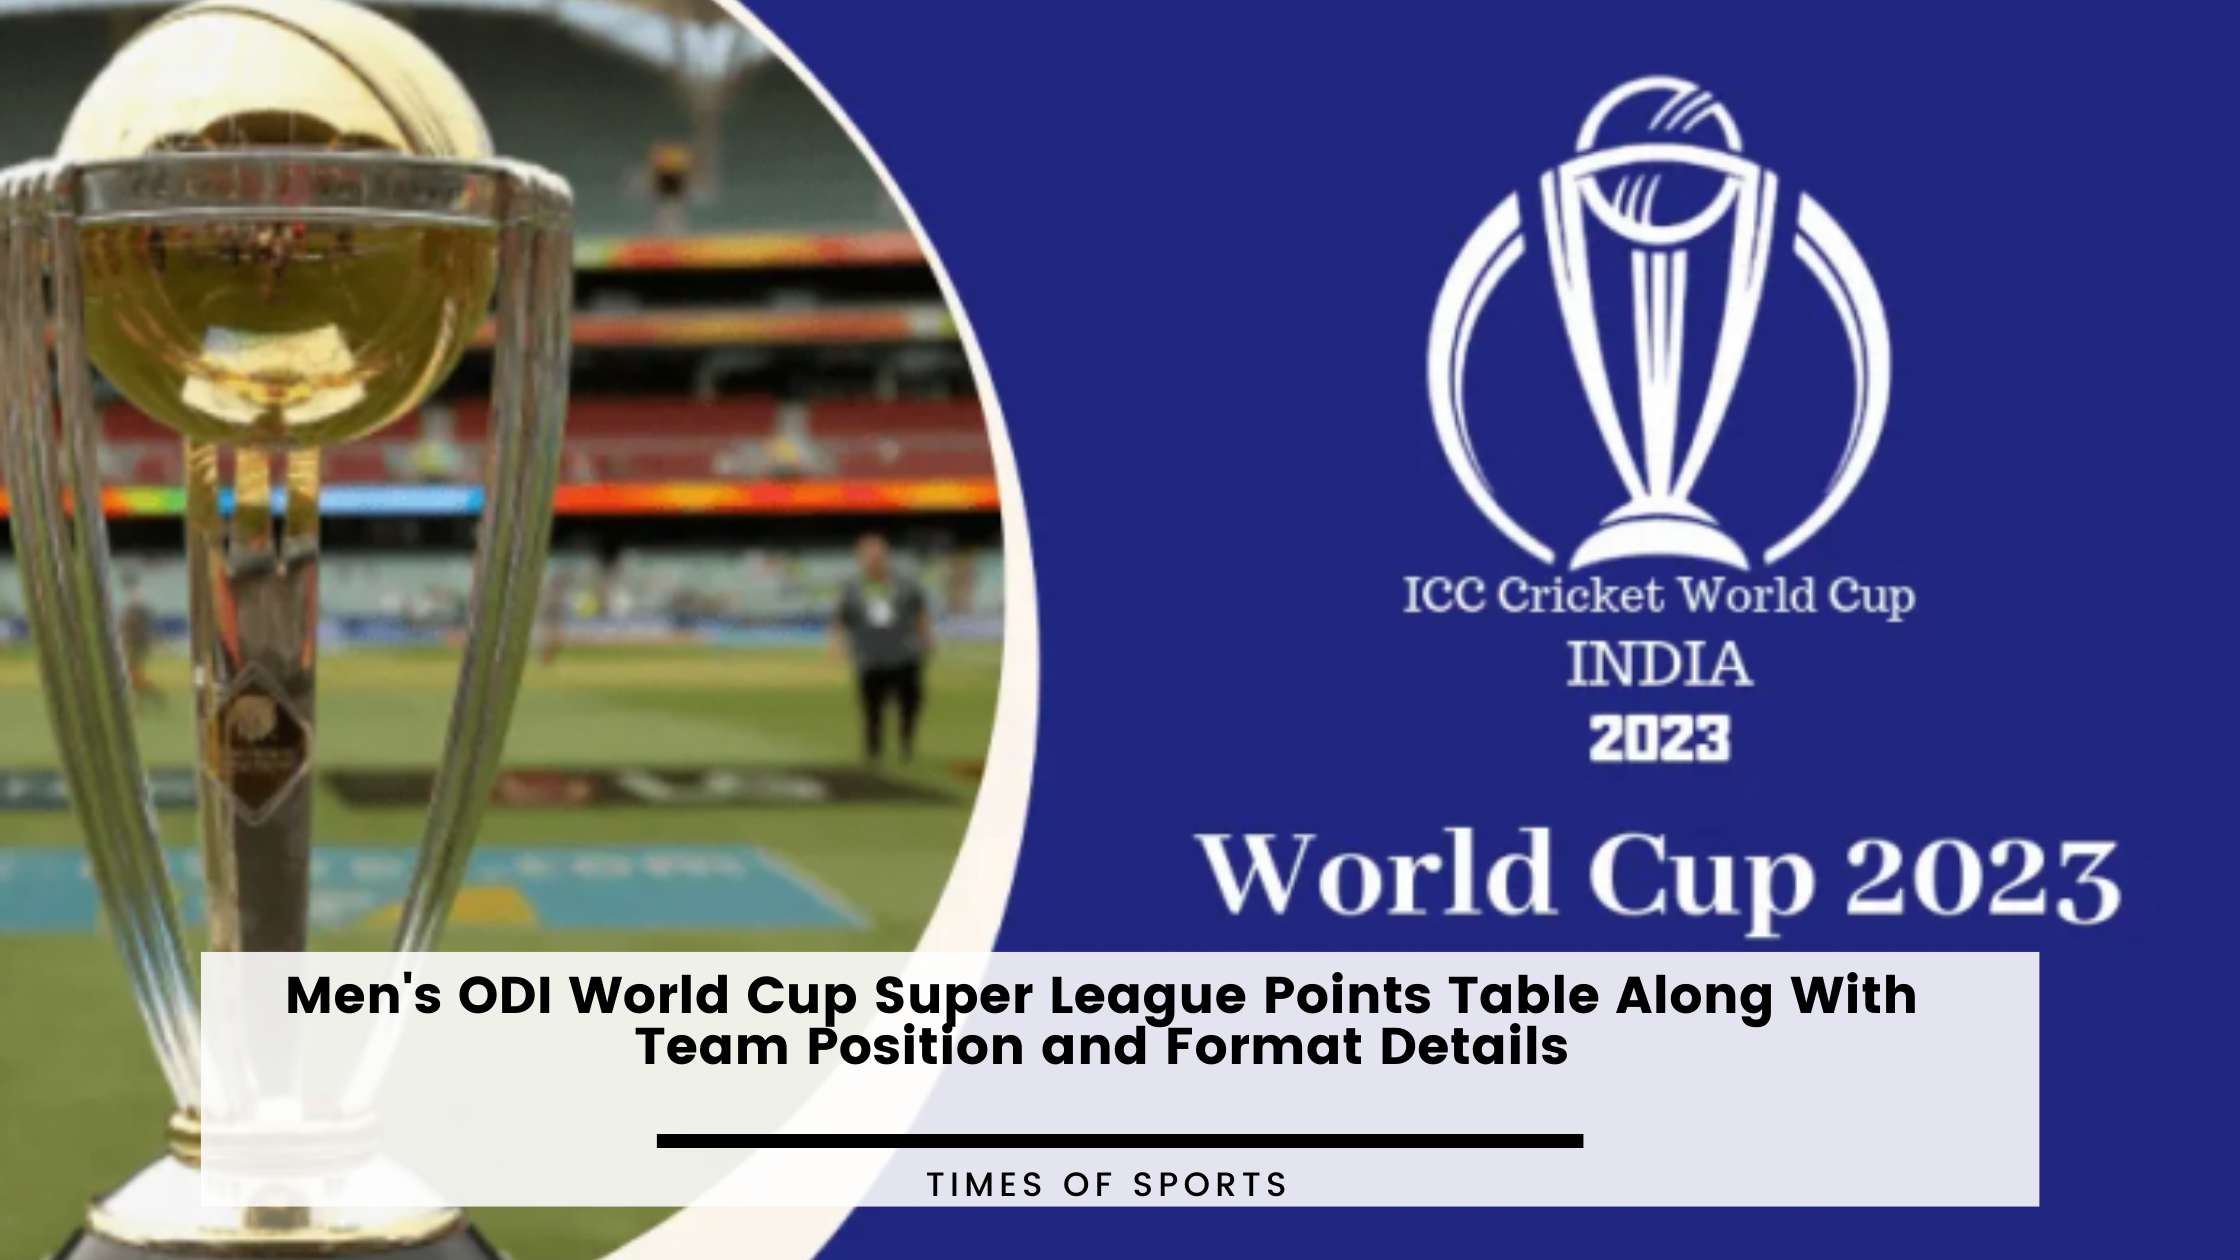 Men's ODI World Cup Super League Points Table Along With Team Position